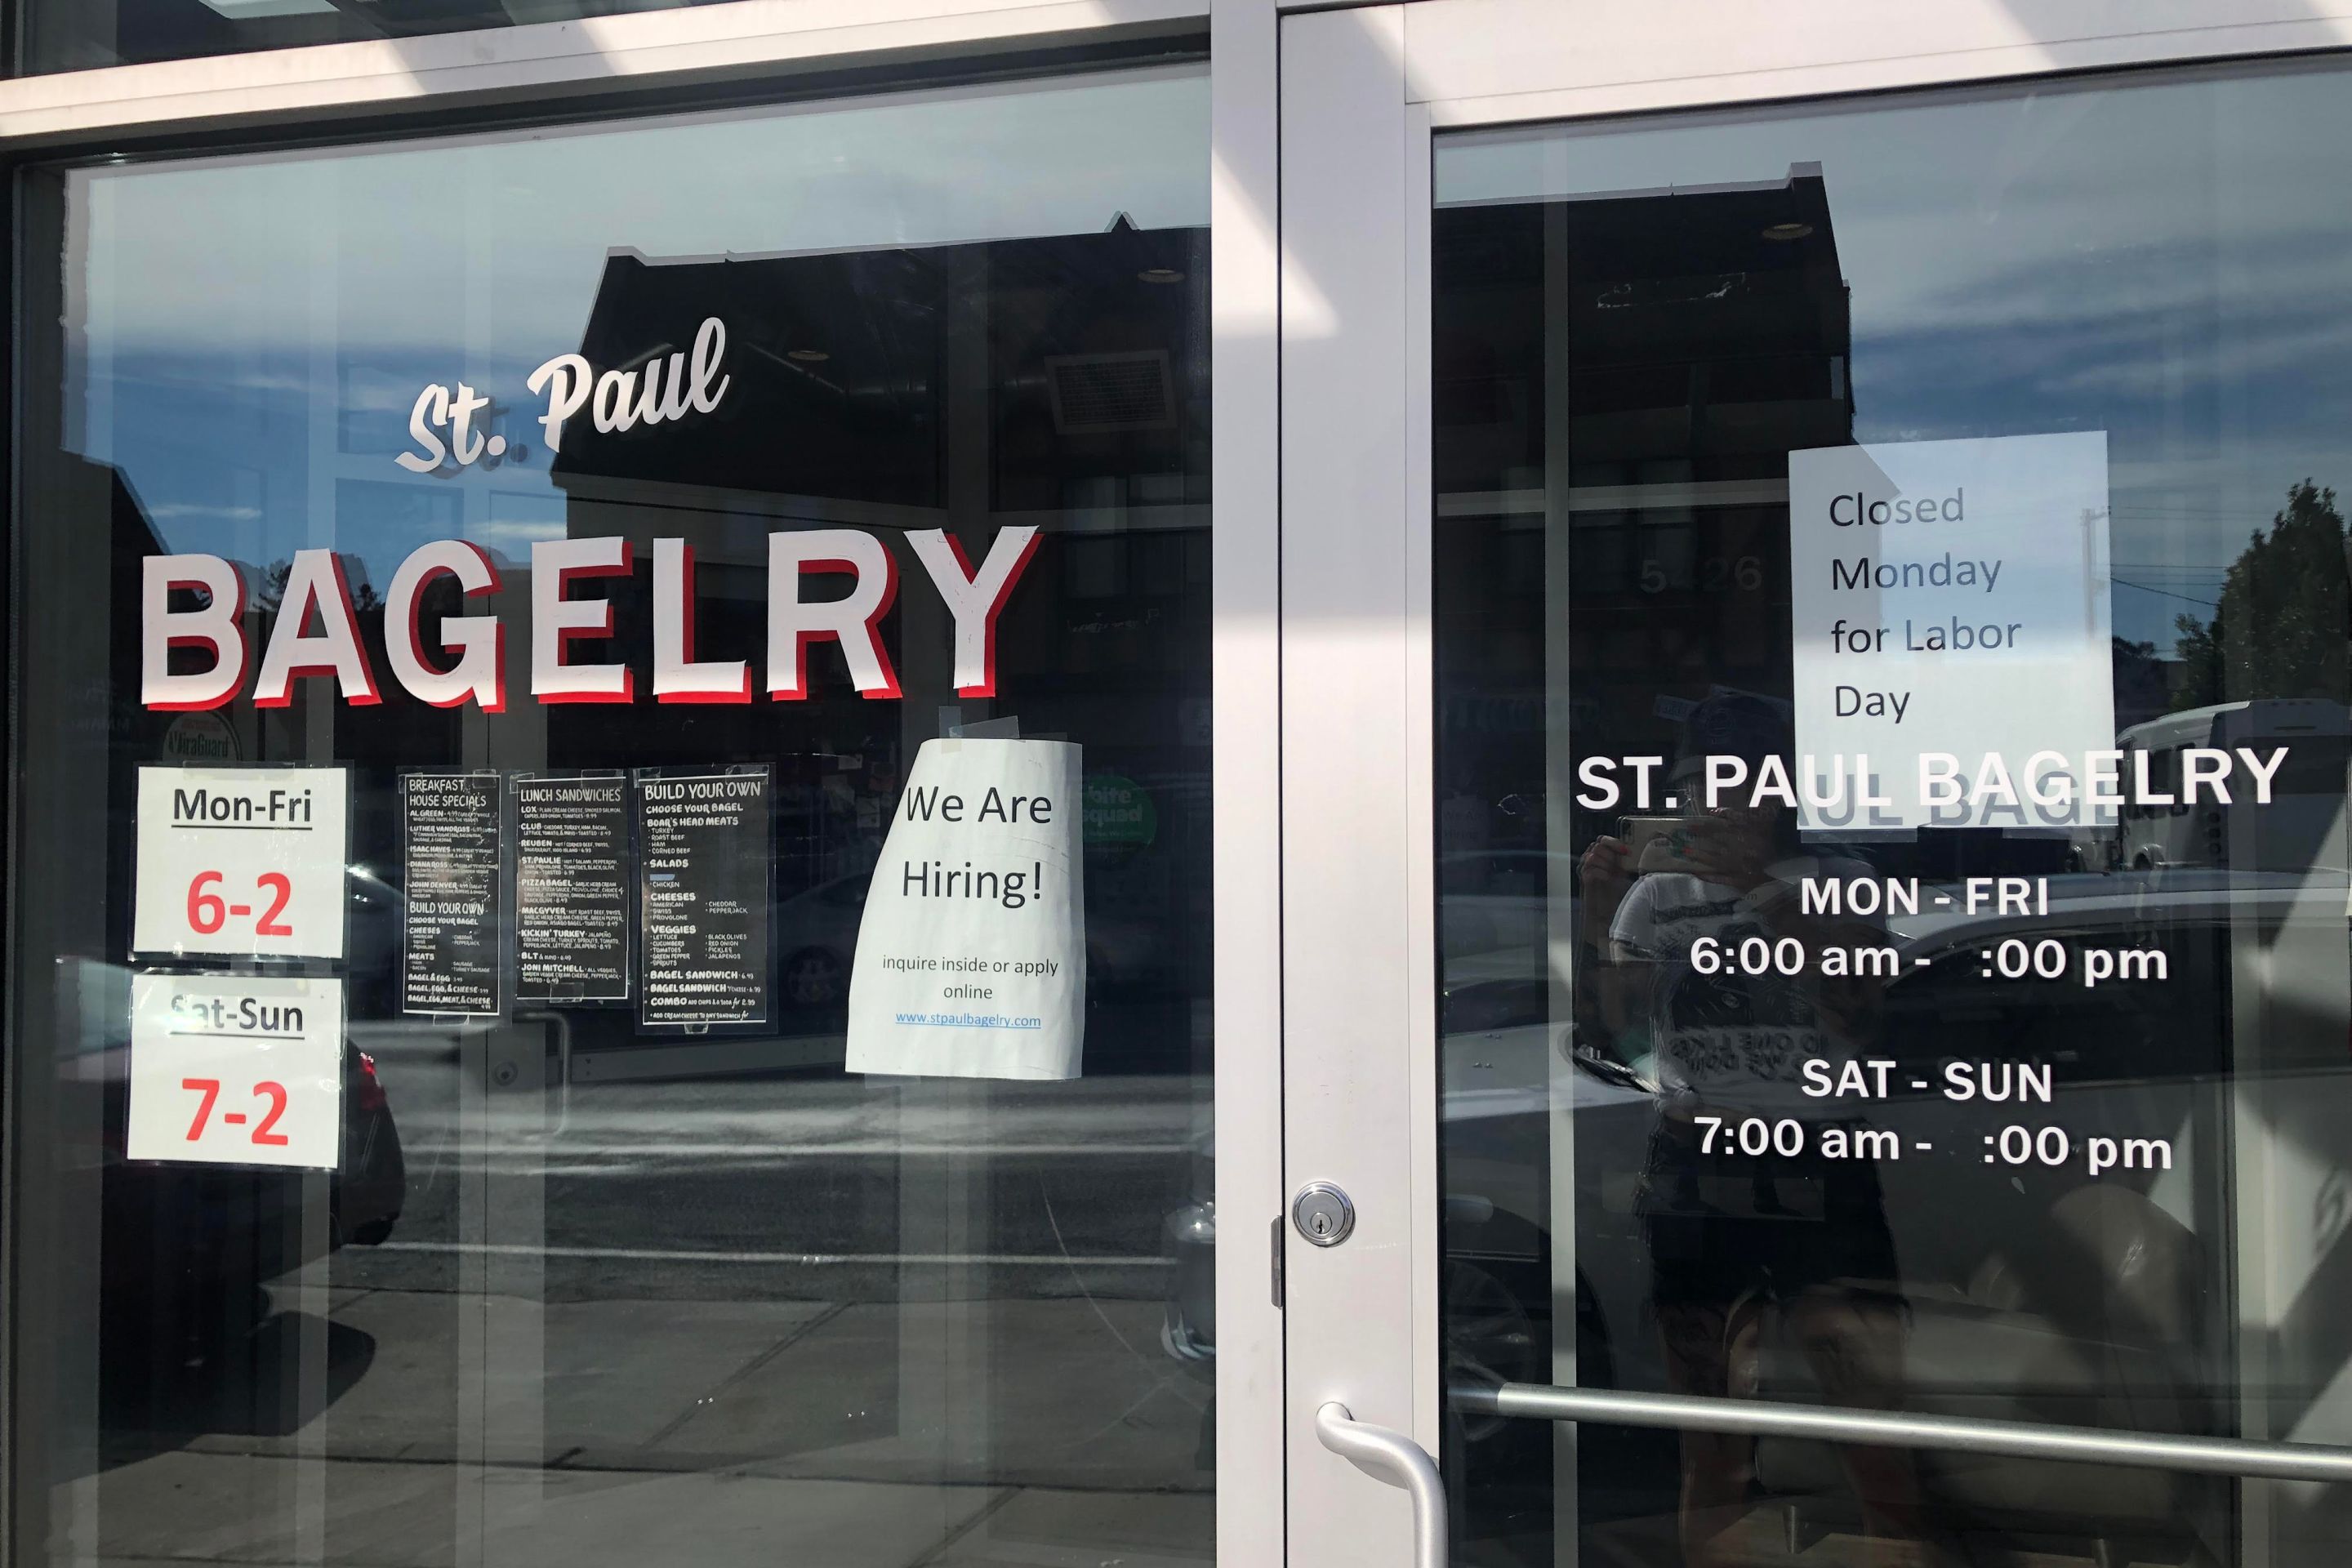 Sign on St. Paul Bagelry's door shows that they're closed on Labor Day